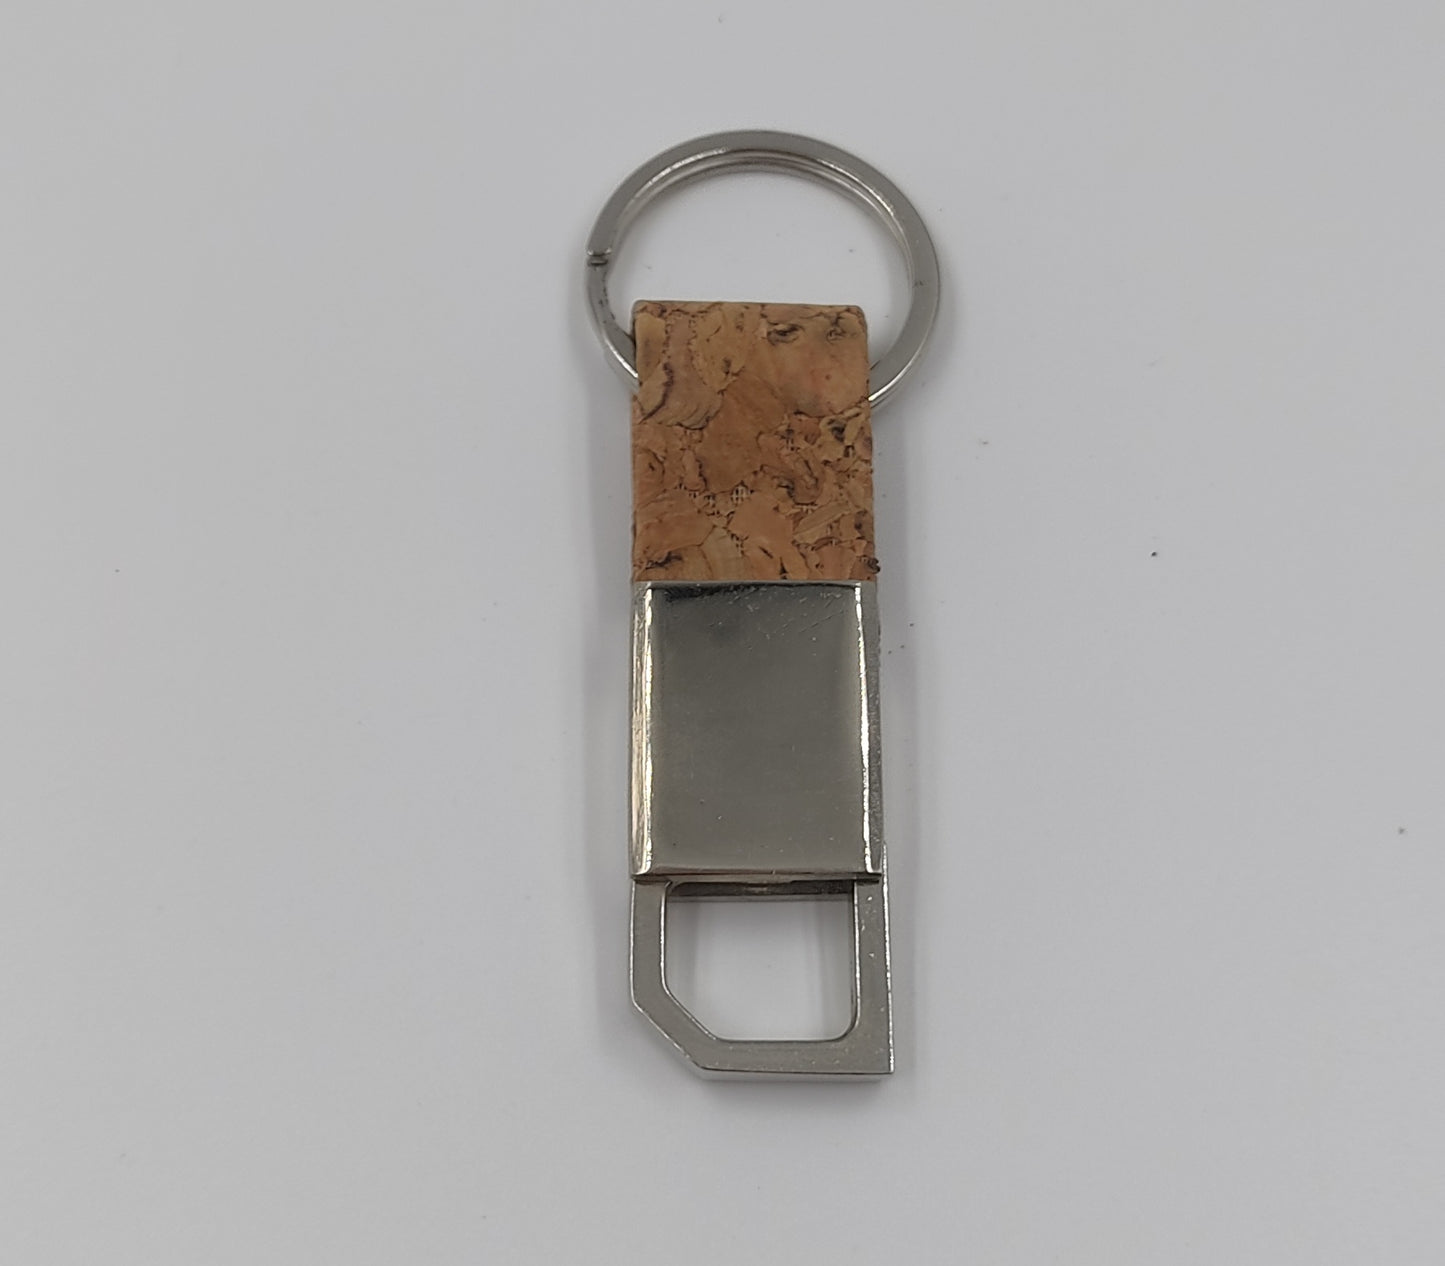 Rectangle hanging metal keychain with Cork strap